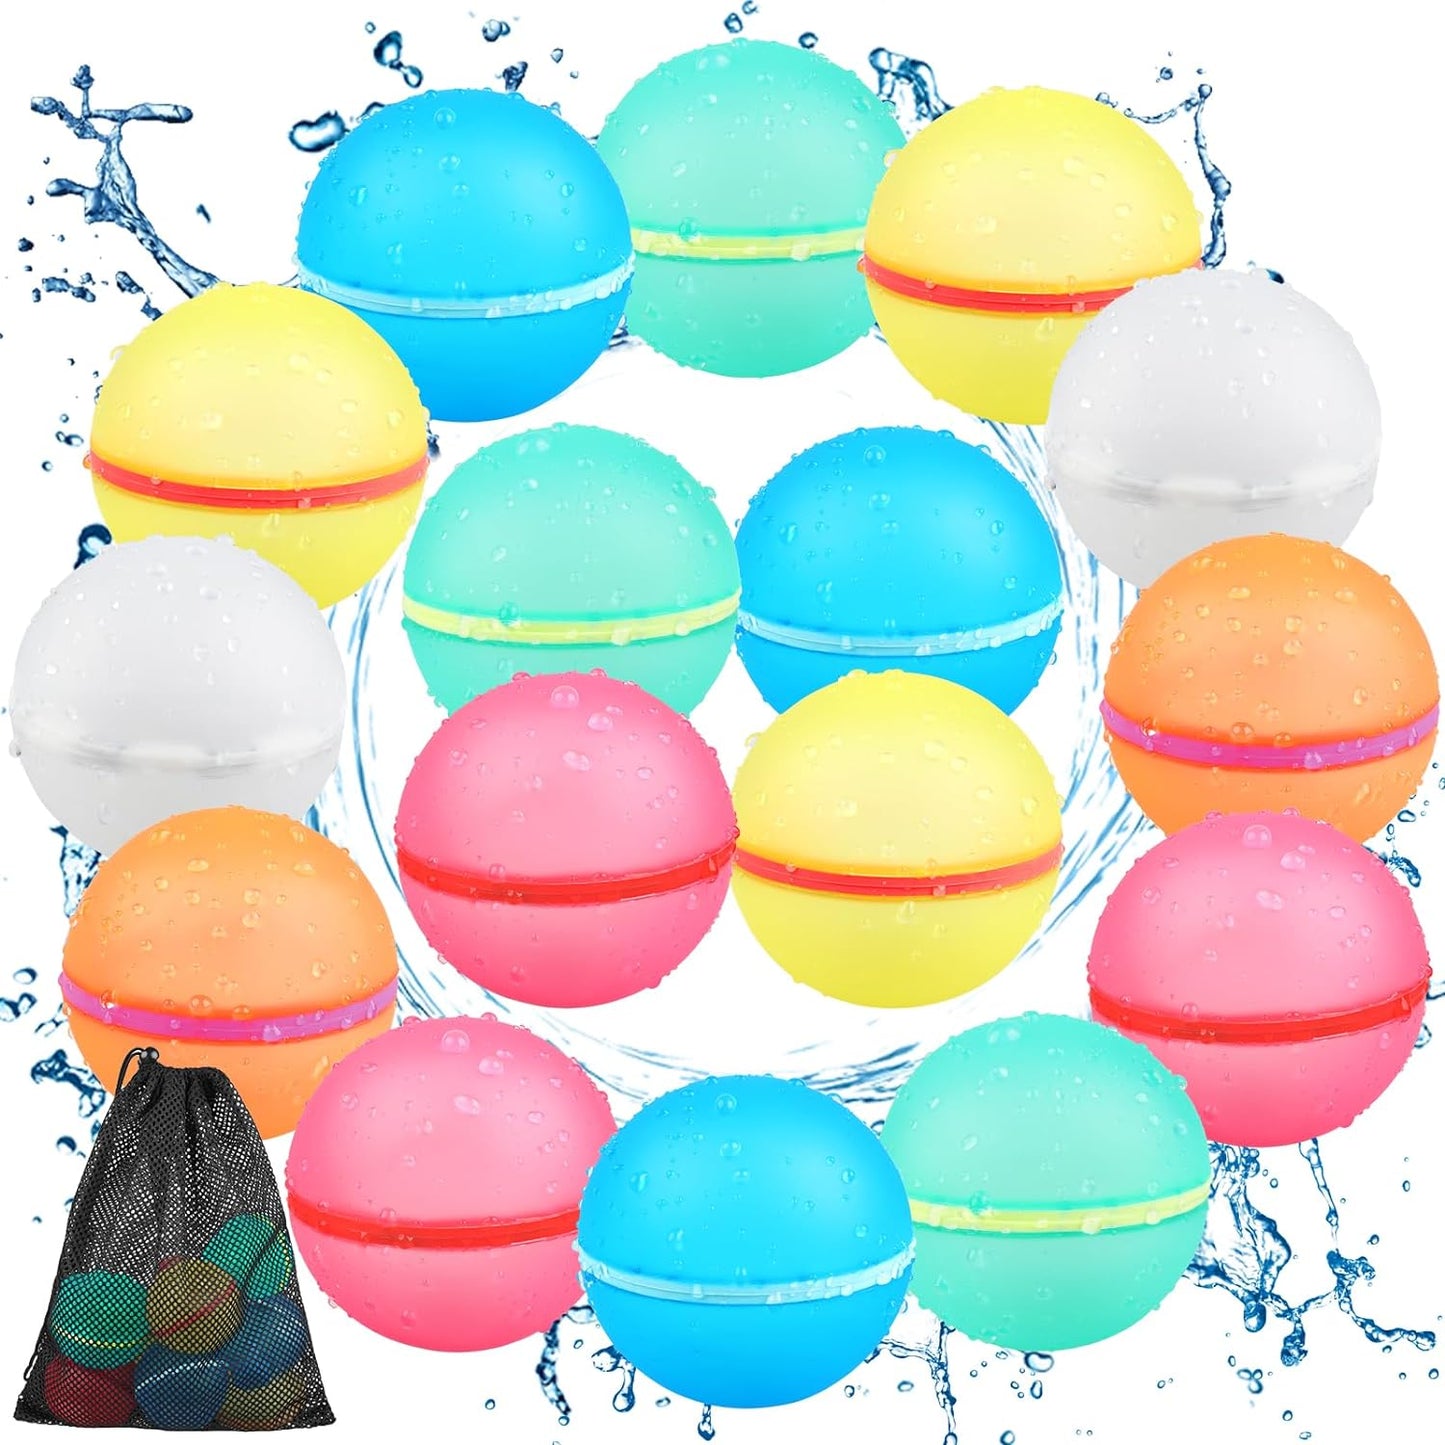 Reusable Water Balloons Refillable Water Bomb, Soft Silicone Water Balls with Mesh Bag, Quick Fill & Self-Sealing Water Balloons for Water Fight Games, Outdoor Water Toys for Kids Adults,4Pcs